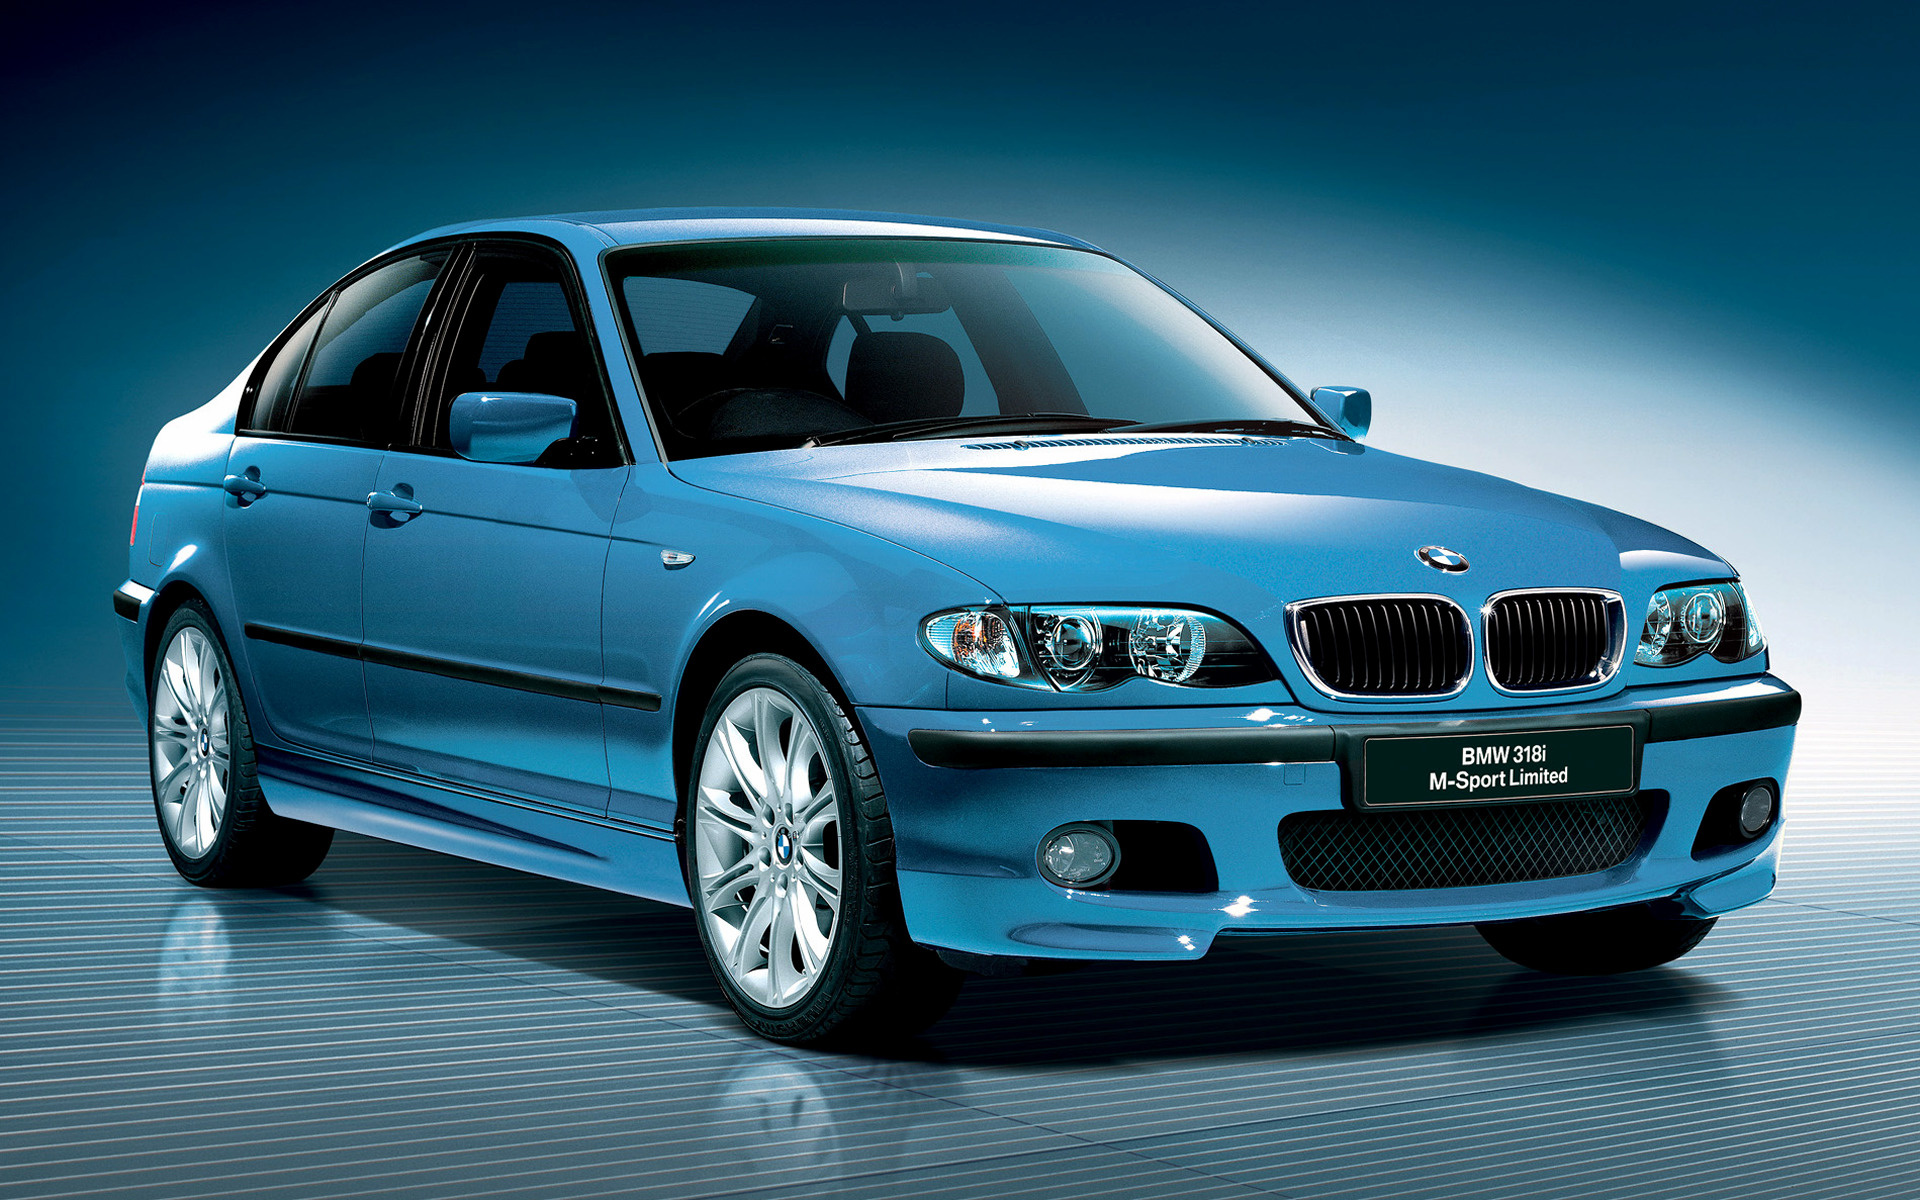 2002 BMW 3 Series M Sport Limited Edition (UK